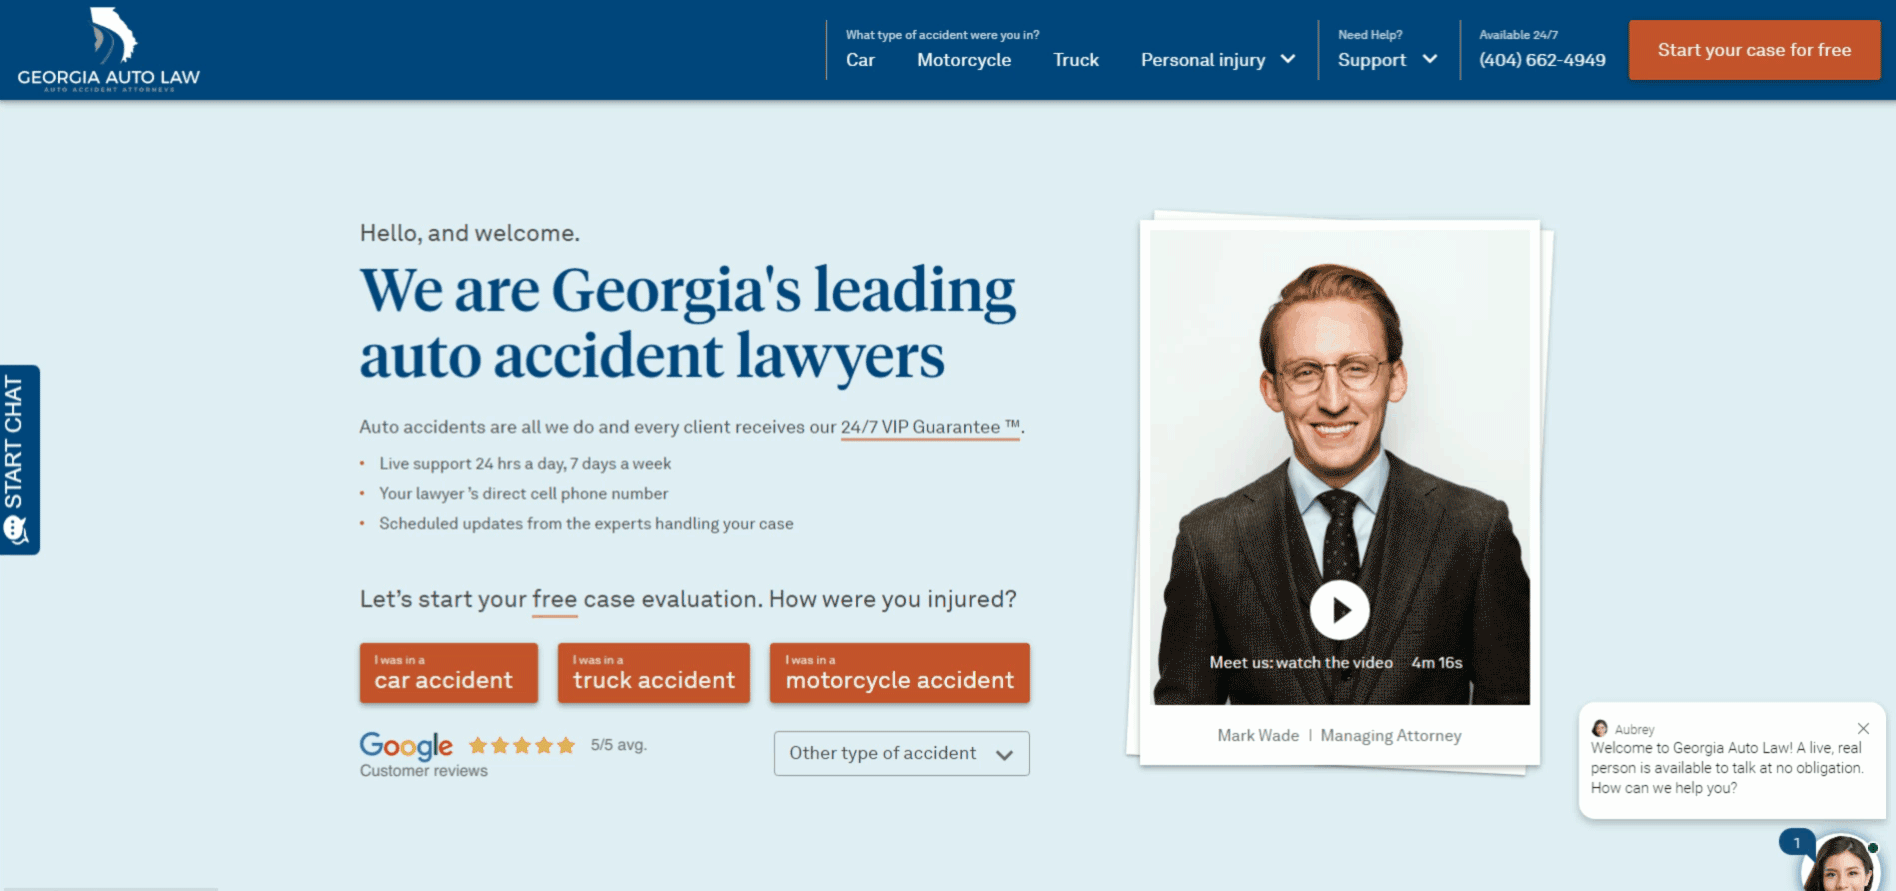 Interactive experience of the WordPress lead capture website we created for Georgia Auto Law.  